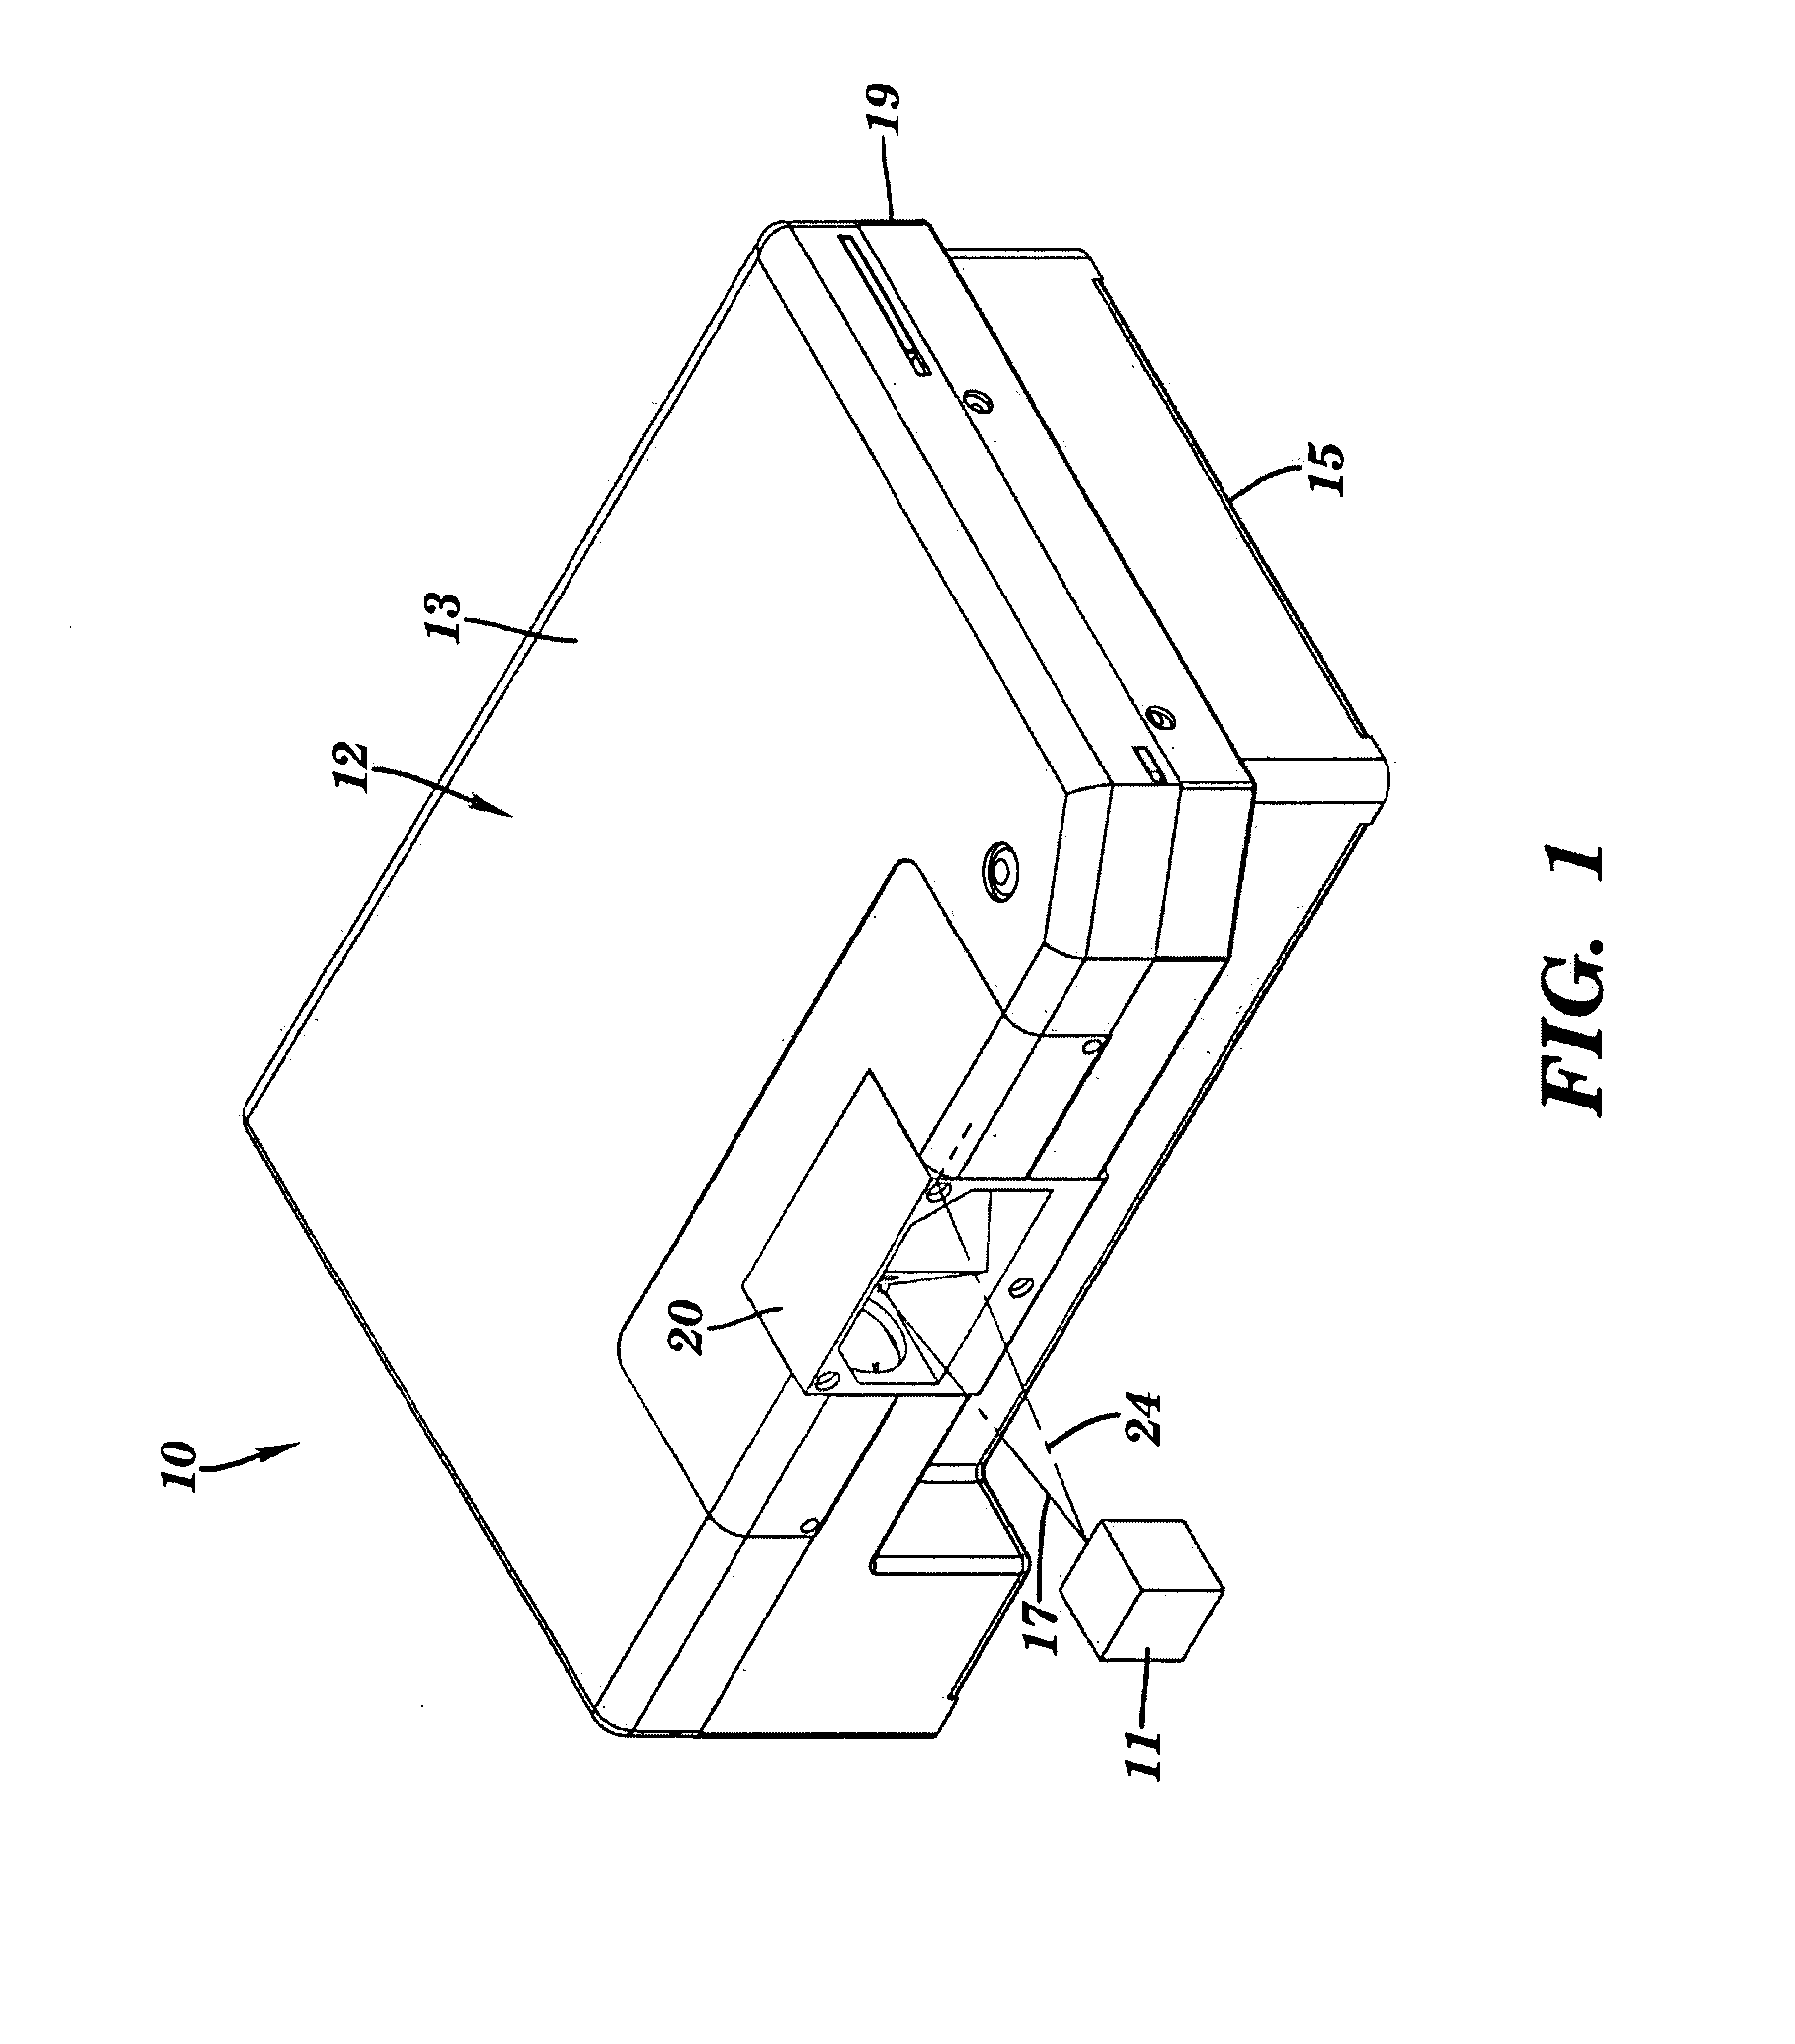 Systems, methods, and devices for handling terahertz radiation